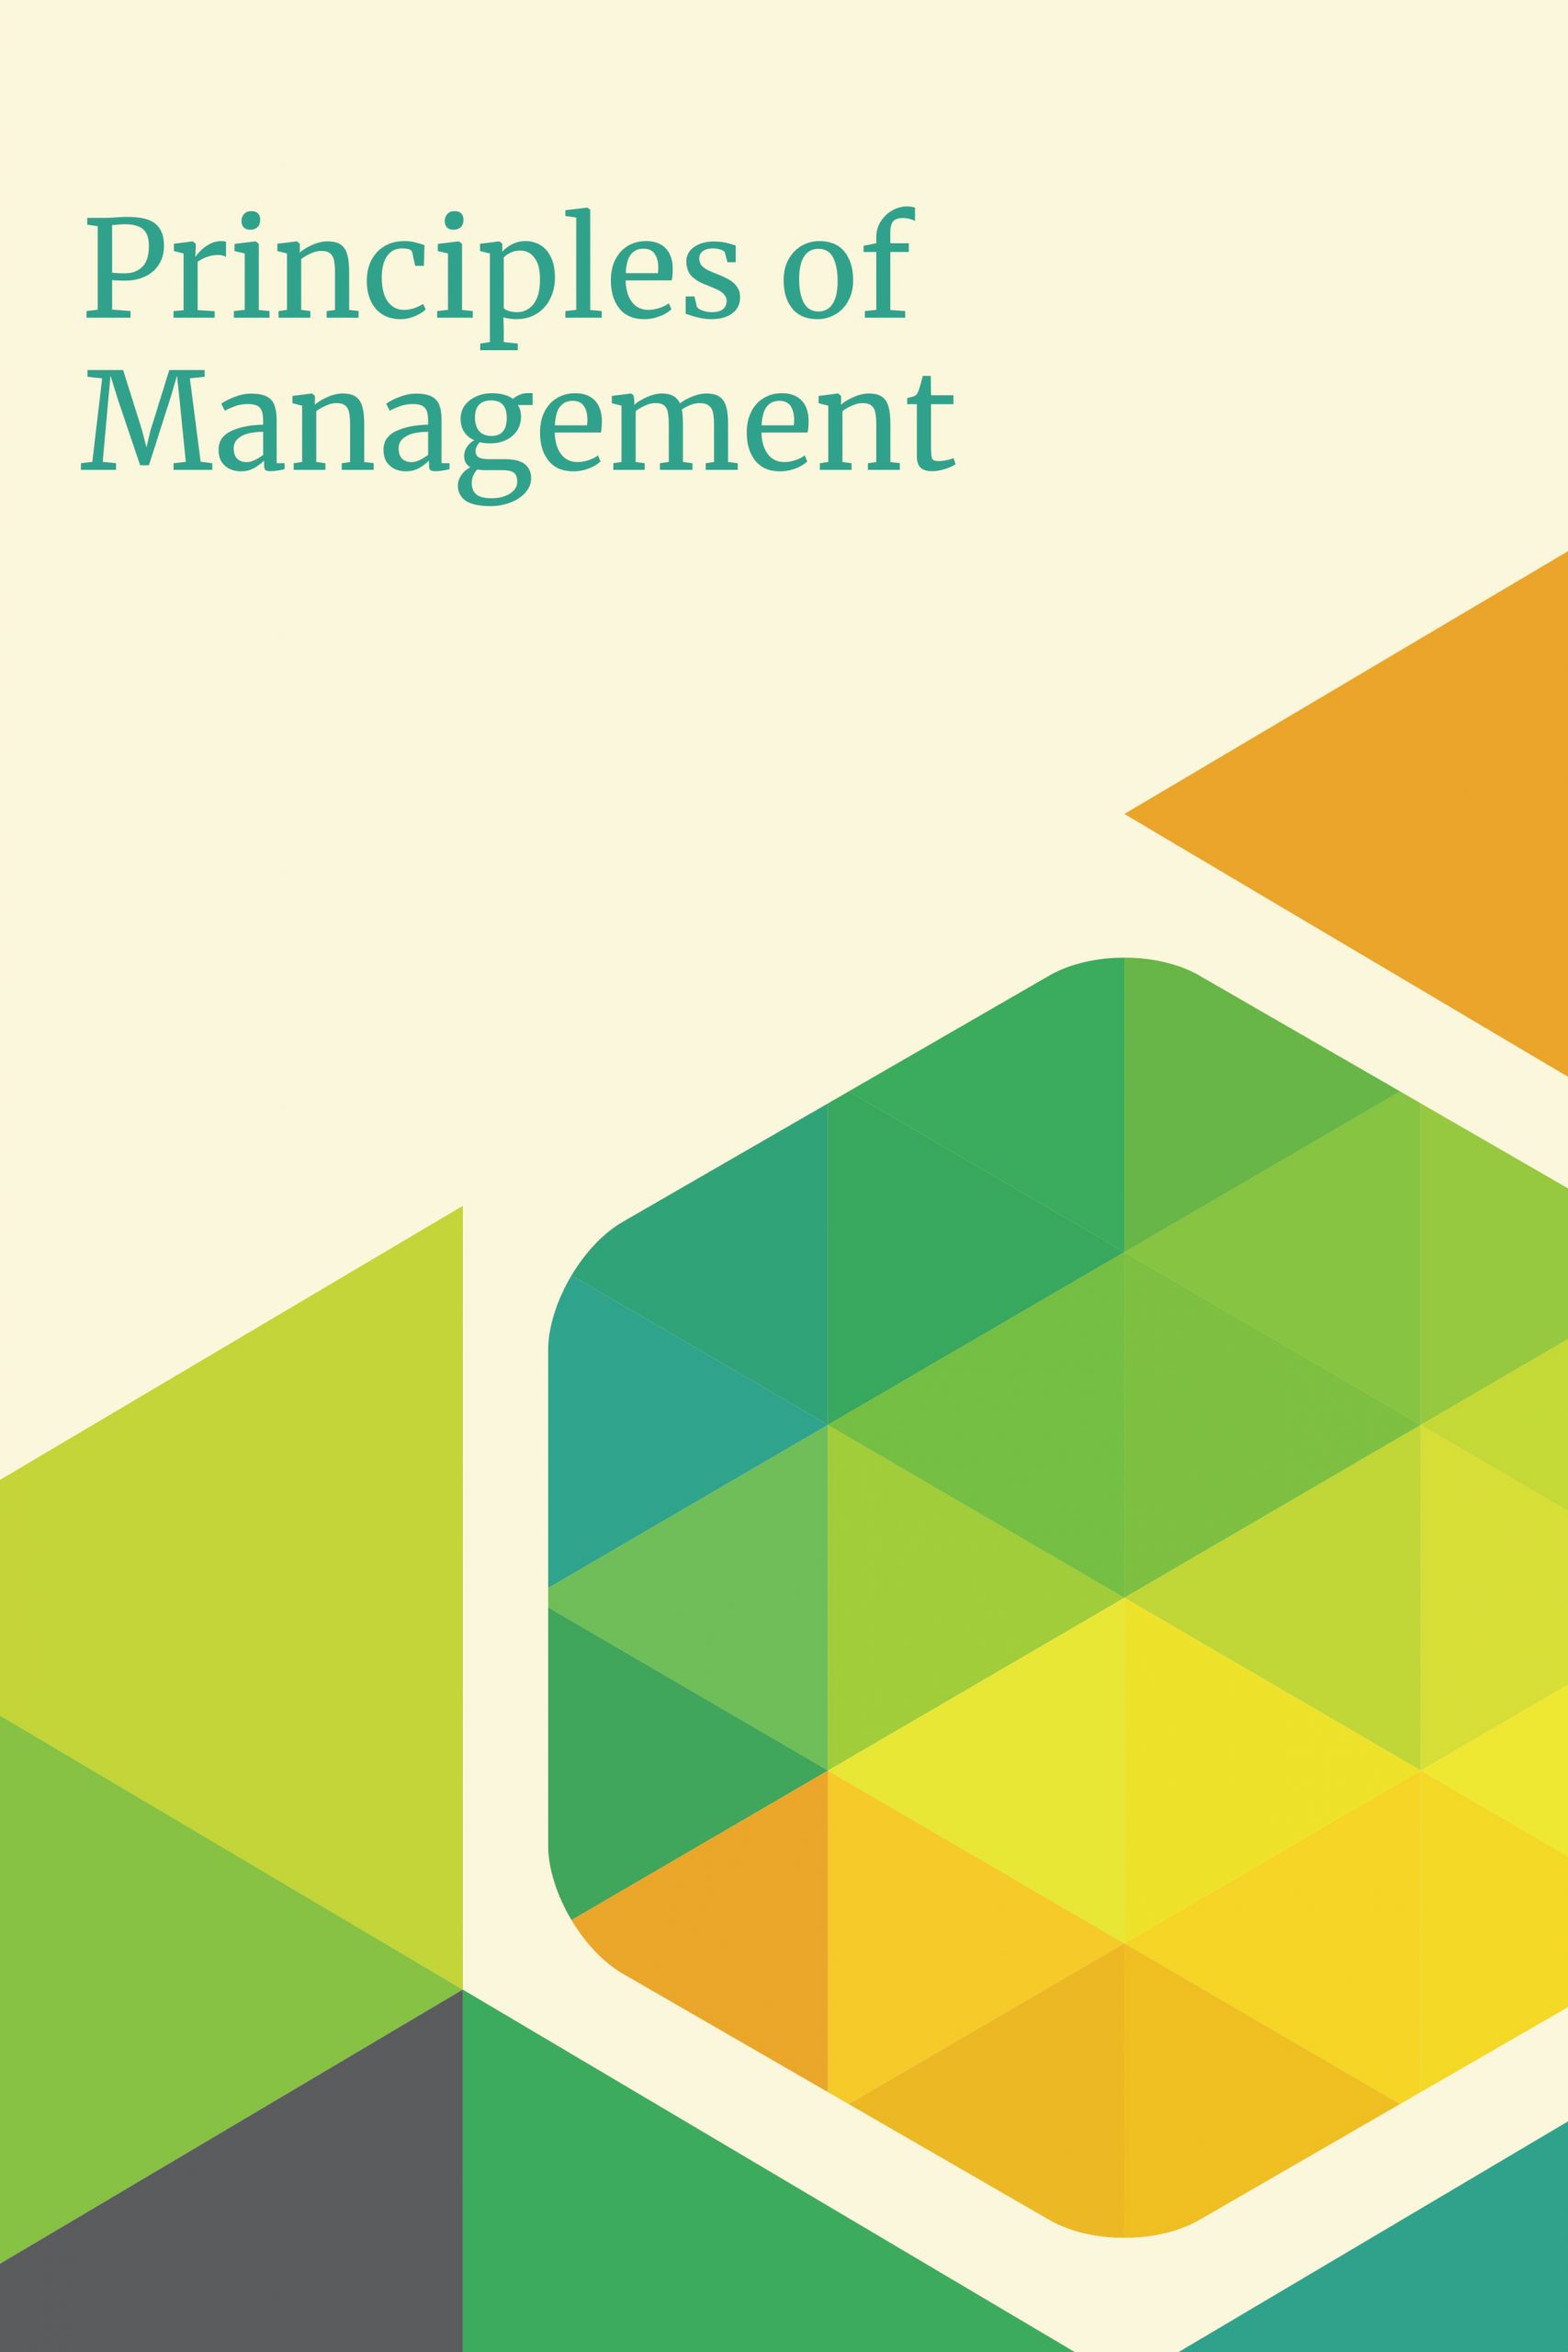 Principles of Management book cover